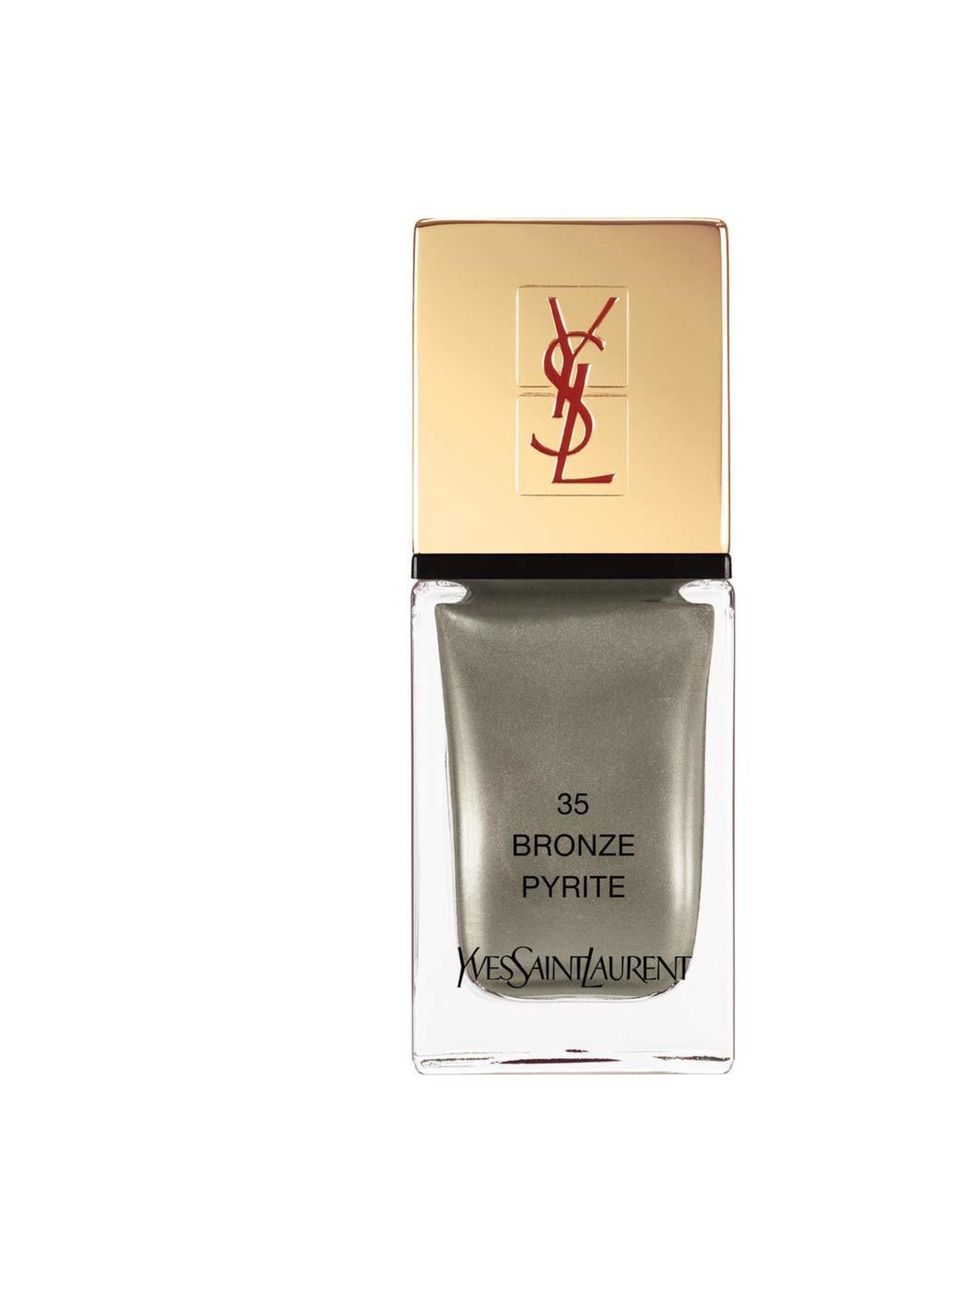 <p>La Laque Couture in Bronze Pyrite No35, £18 by <a href="http://www.yslbeauty.co.uk/">YSL</a></p>